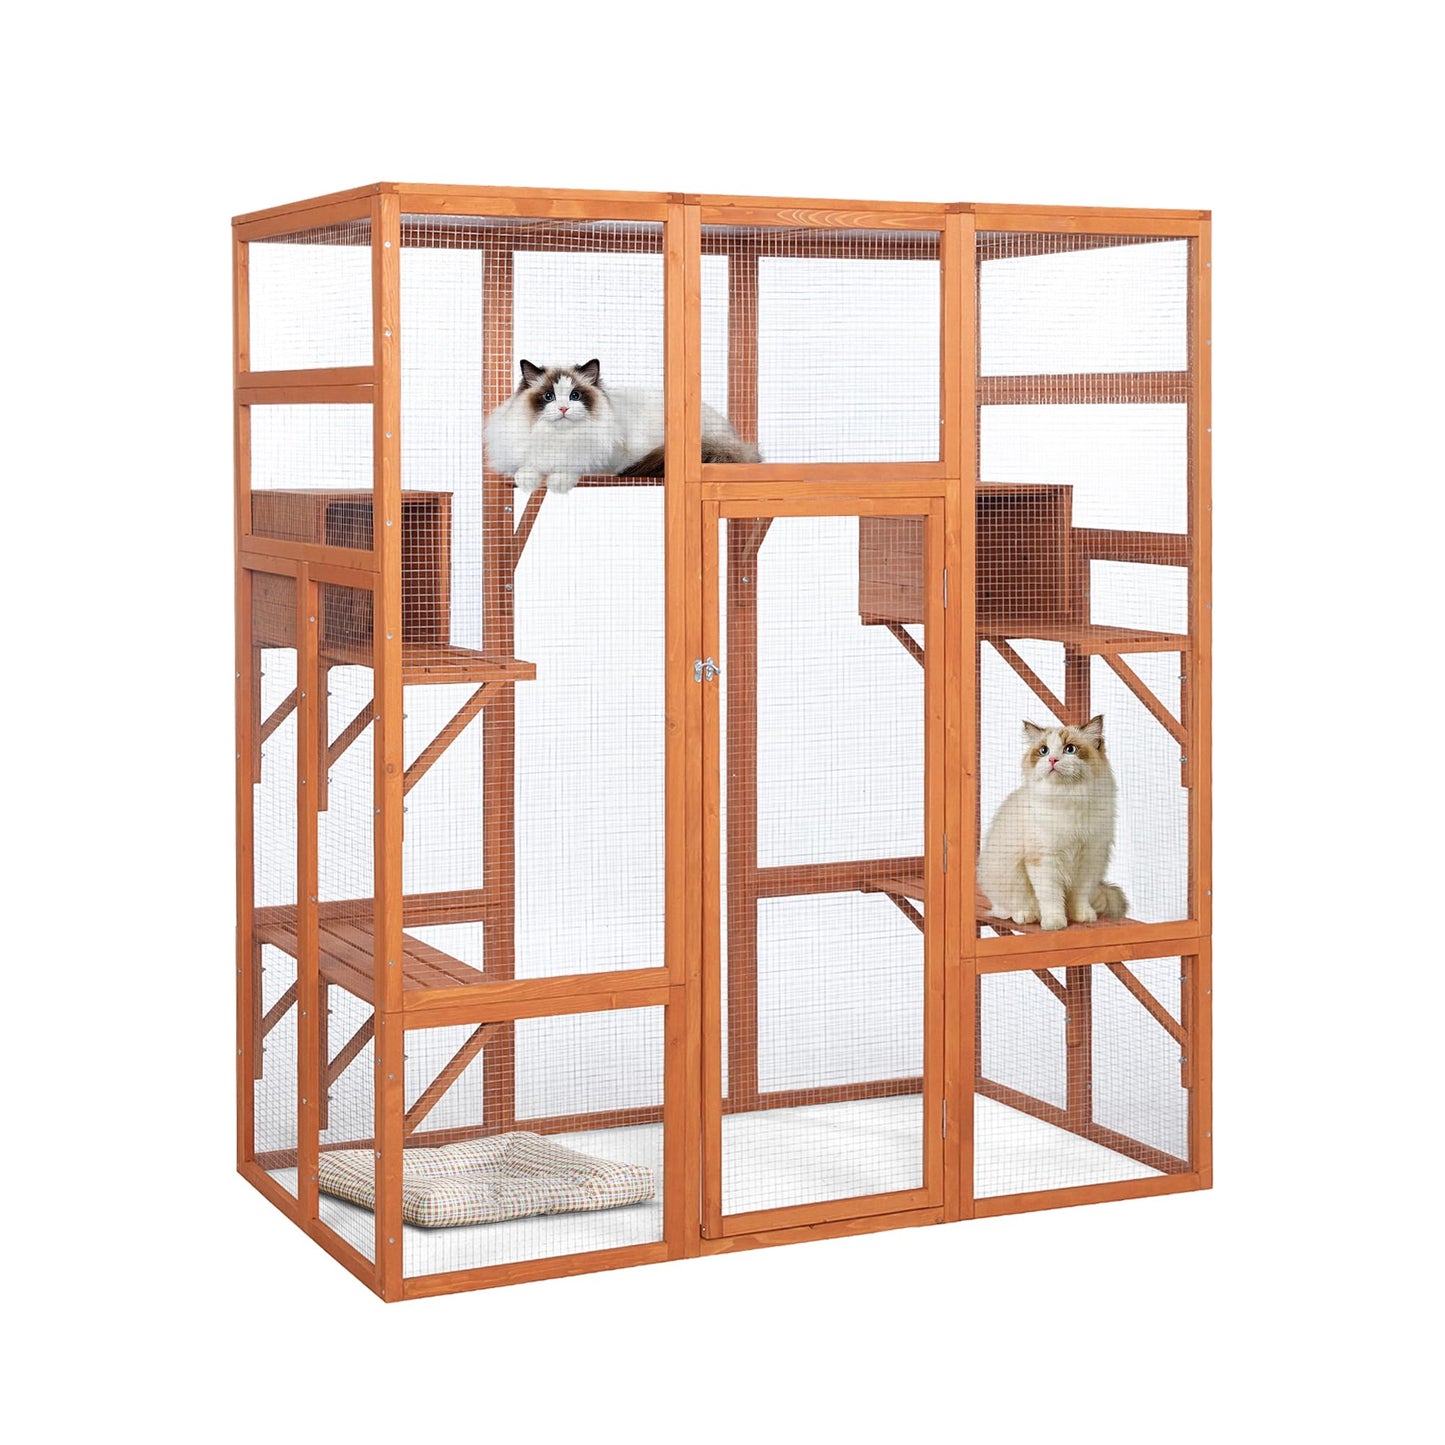 Large Cat House Outdoor Catio - Cat Play & Run Enclosures Indoor Kitty Window Cage with Waterproof Roof, 7 Platforms & 2 Resting Box, UV Resistant, 62.5" L x 32.5" W x 70" H, Orange